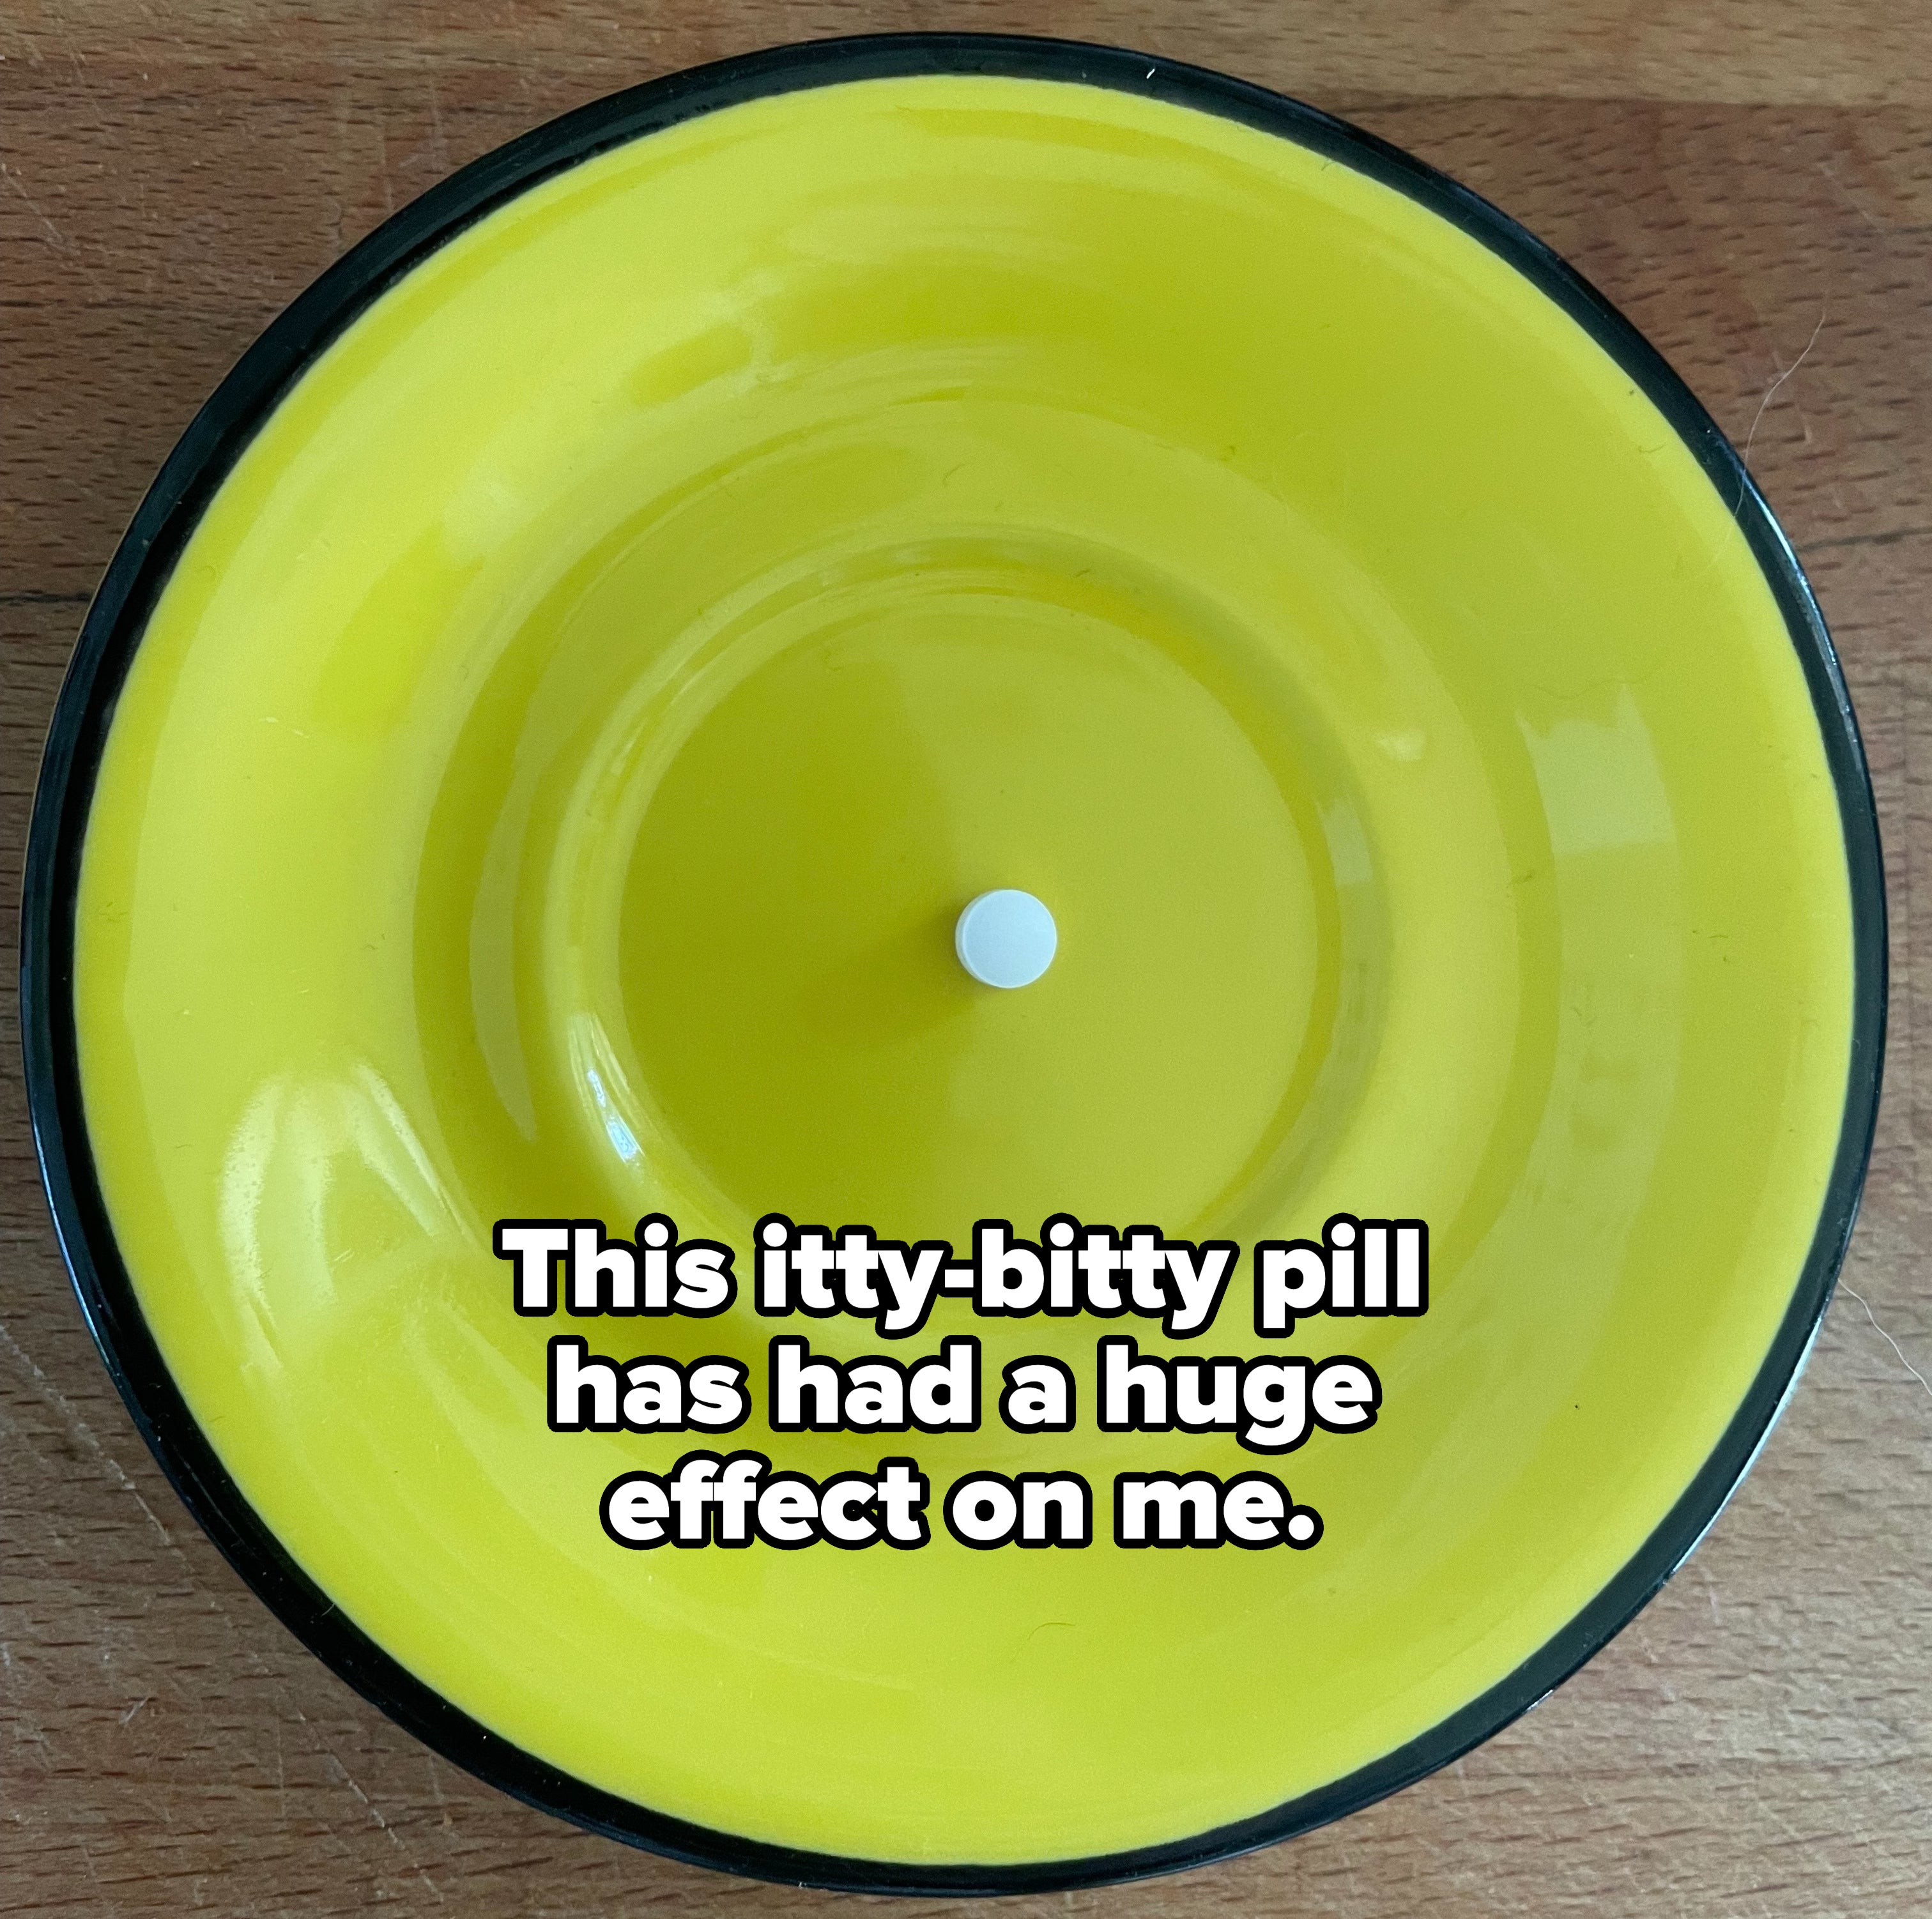 Top view of a small plate with a single white pill and text saying &quot;This itty-bitty pill has had a huge effect on me&quot;